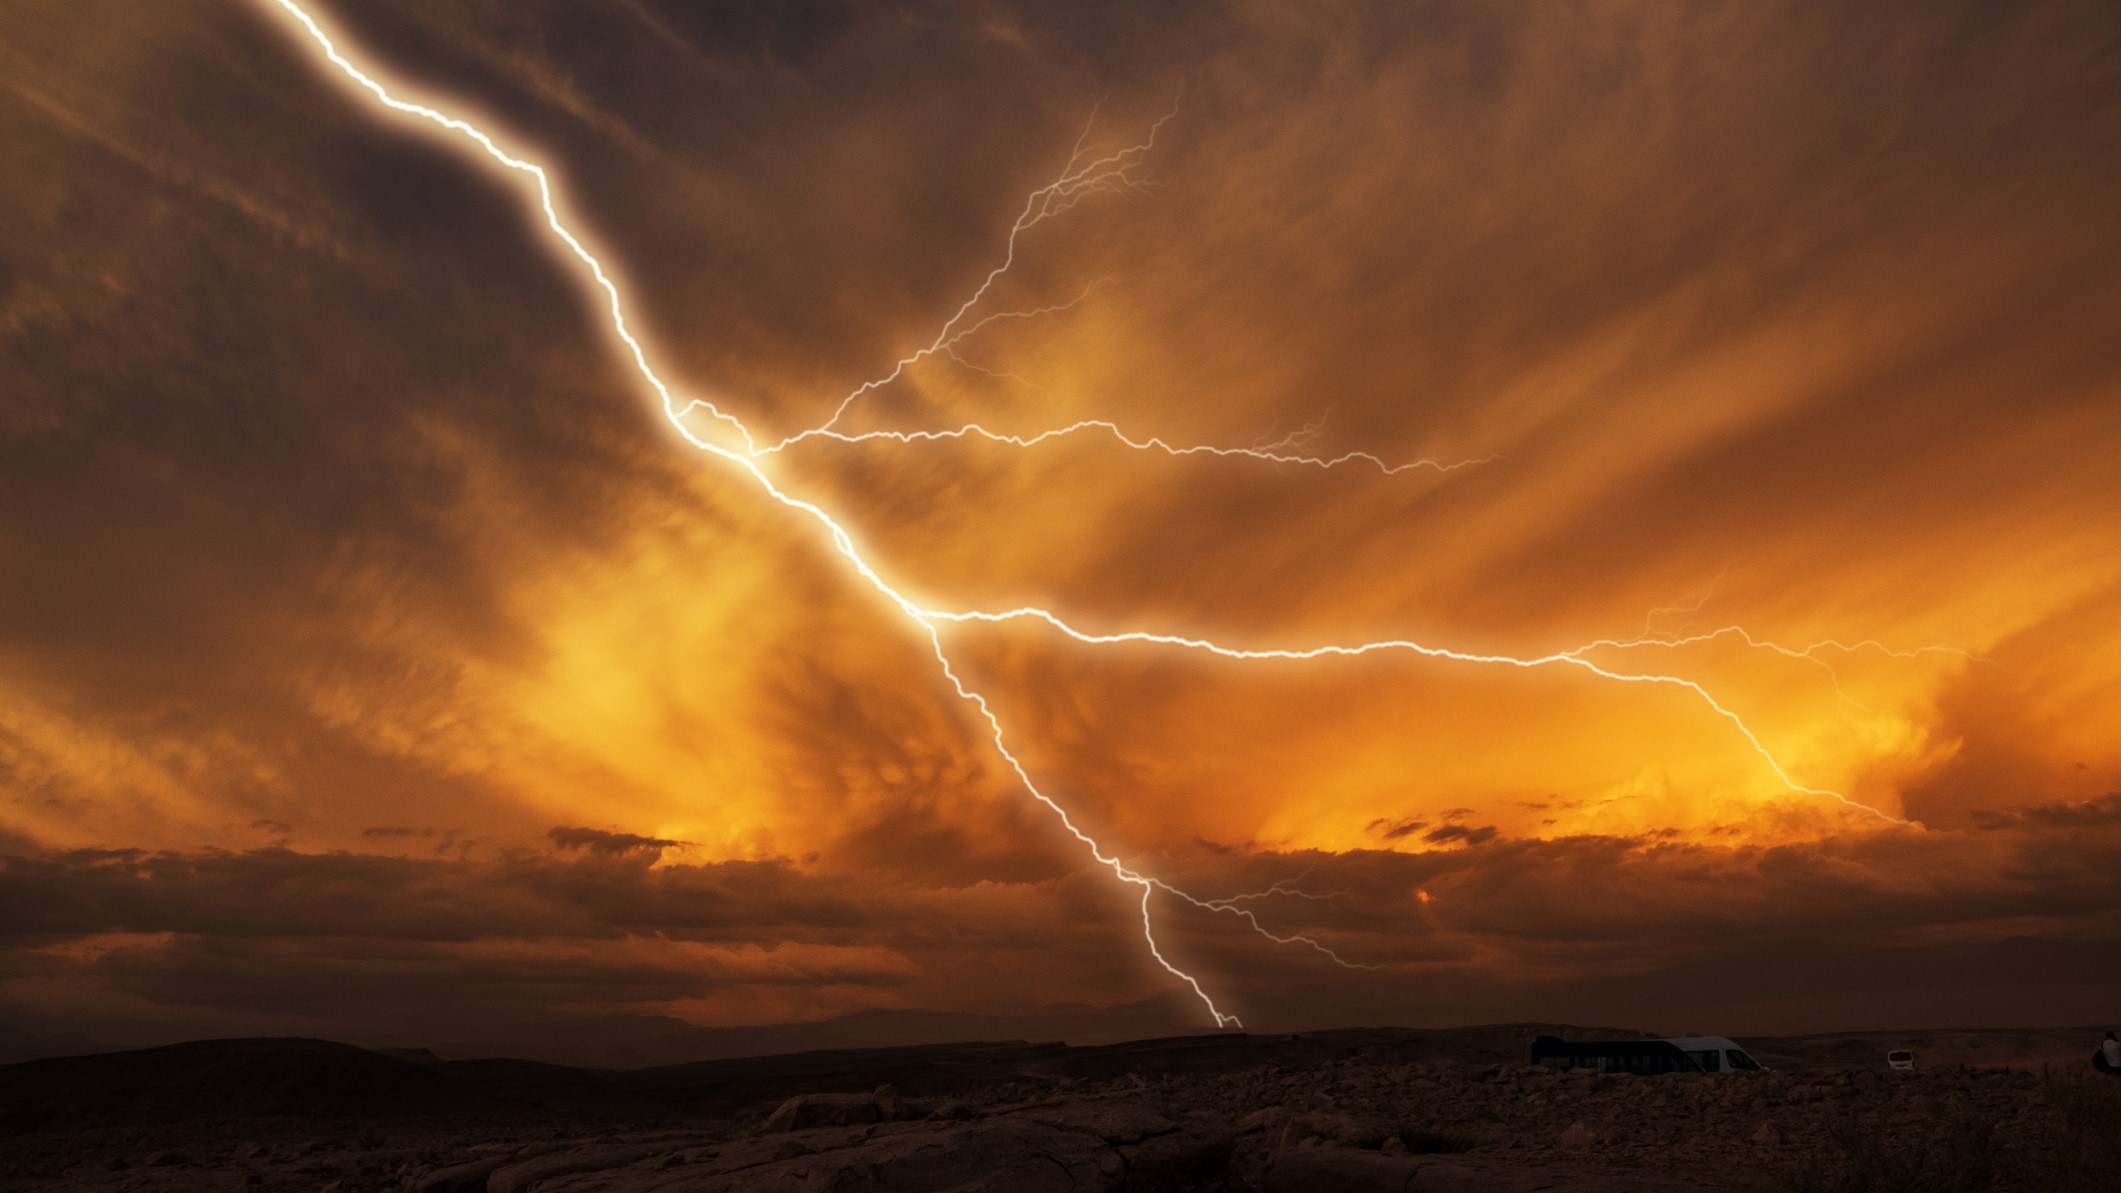 An image of lightning striking towards the ground during a thunderstorm at sunset.